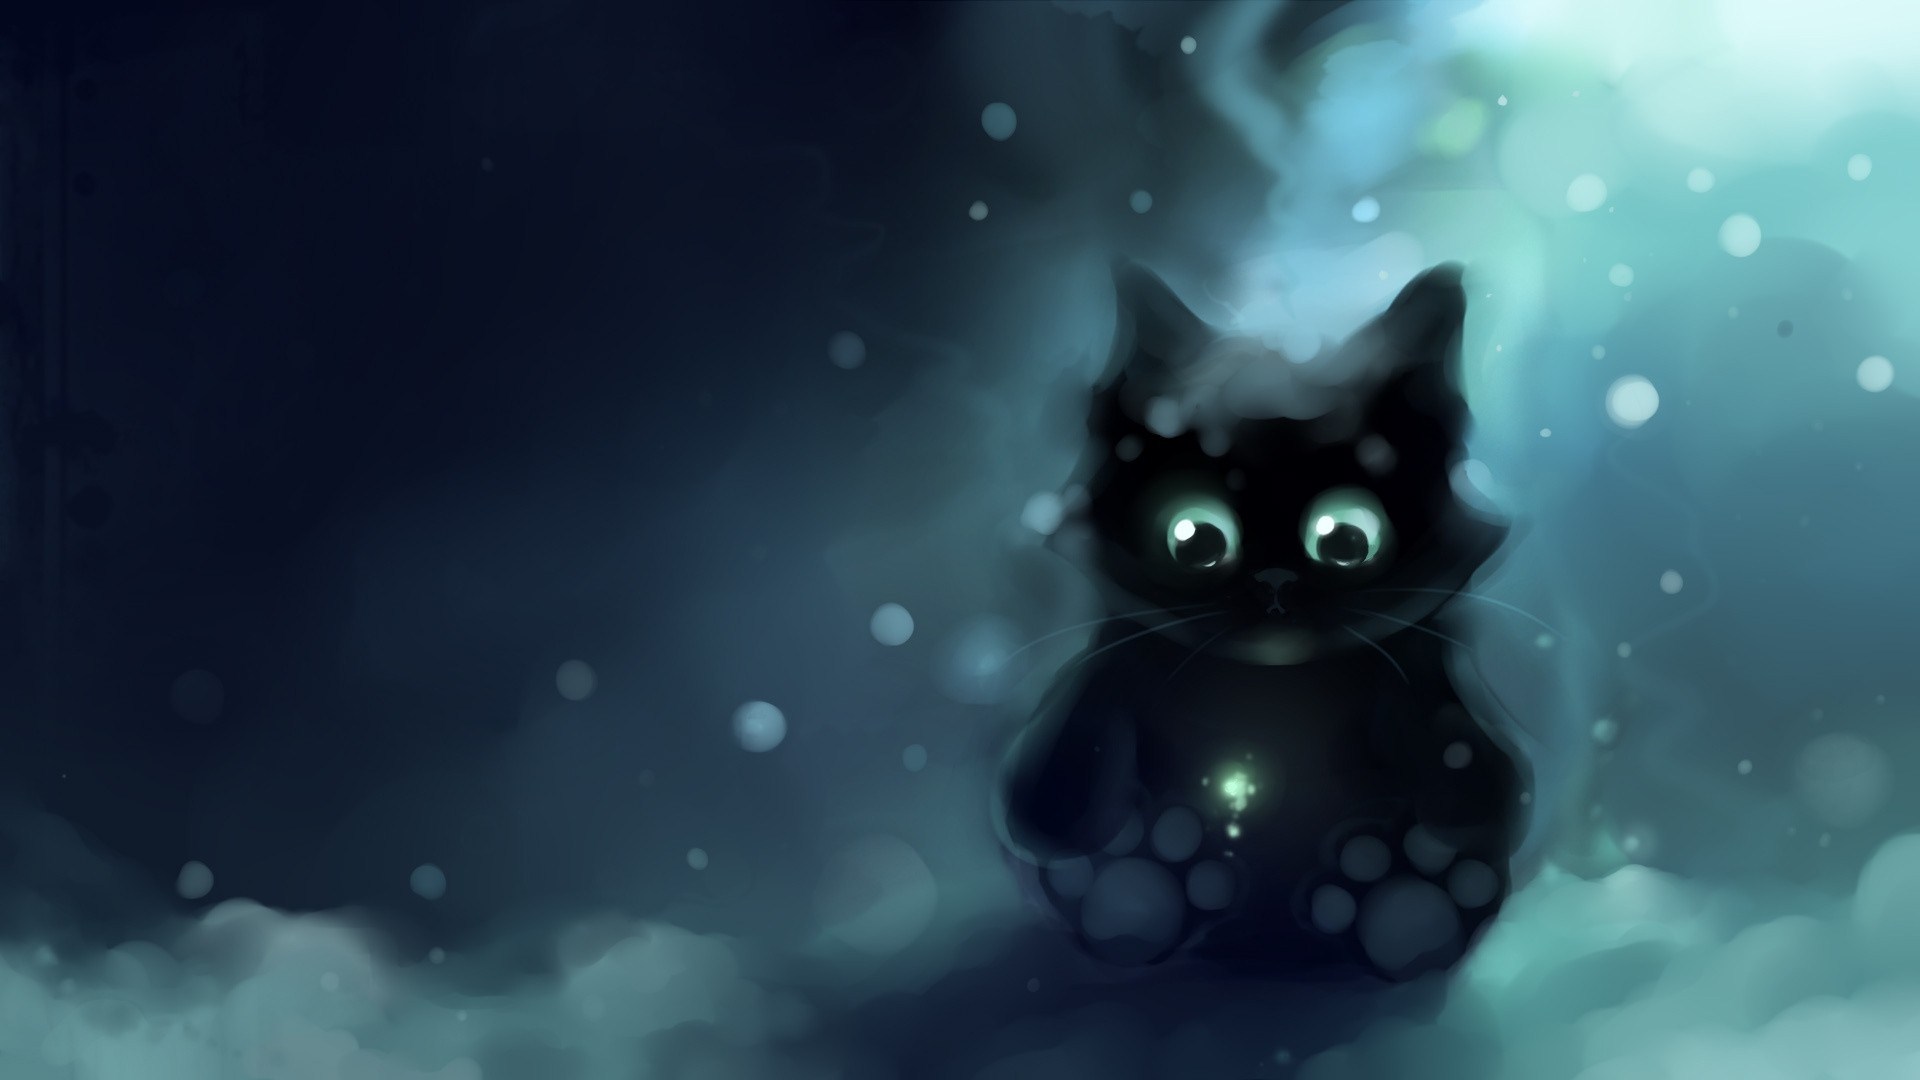 Free download Awesome Black Cat wallpaper 1920x1080 11445